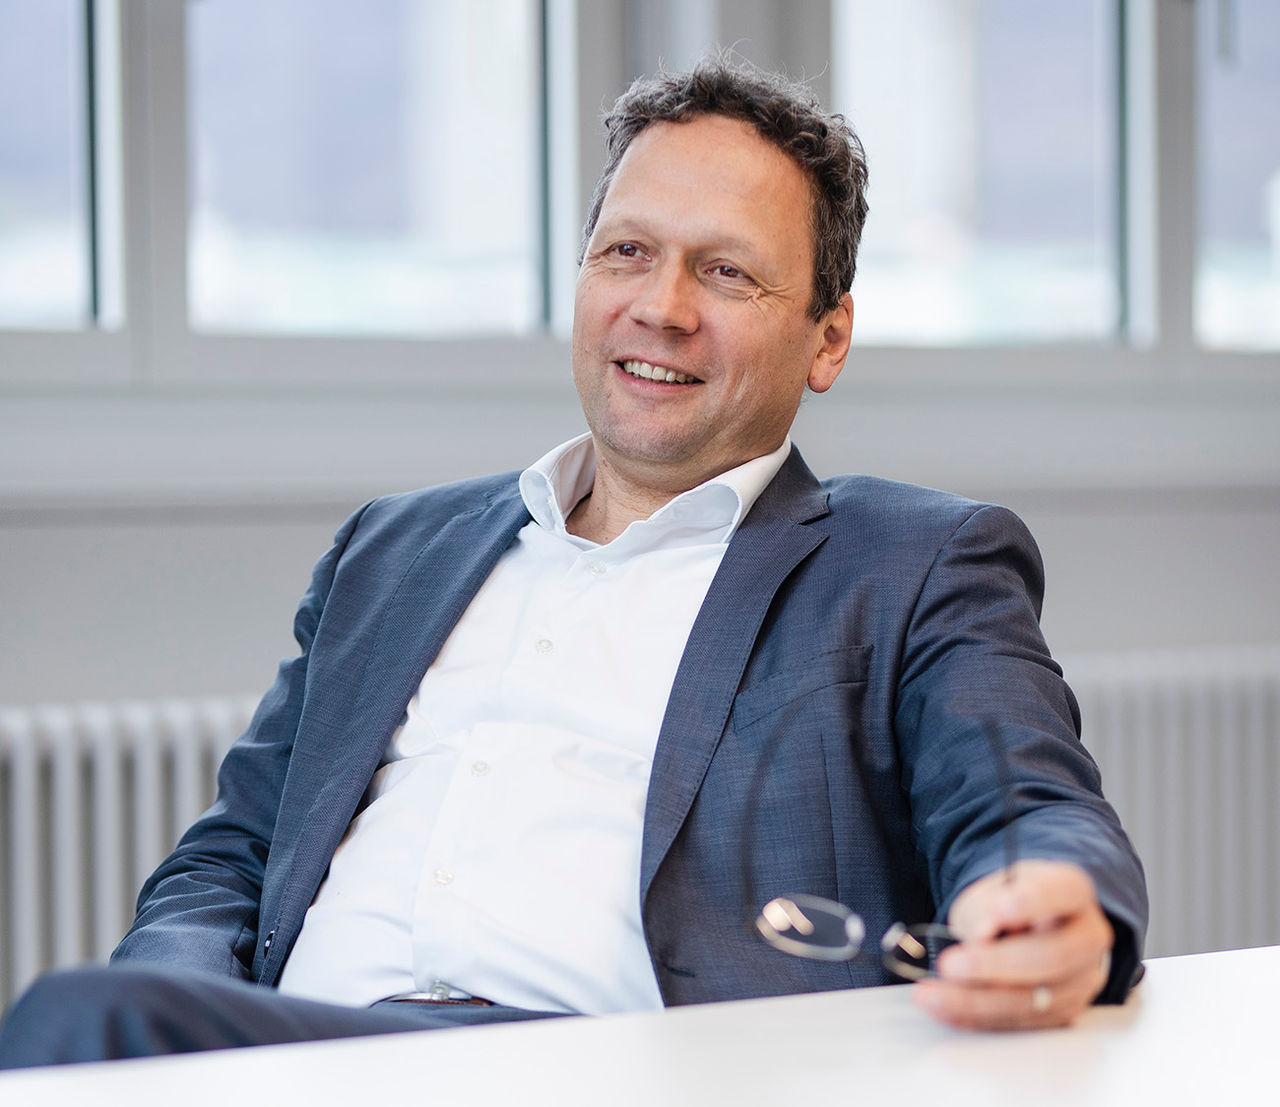 An image showing Dirk Bergmann, Chief Technology Officer at Accelleron